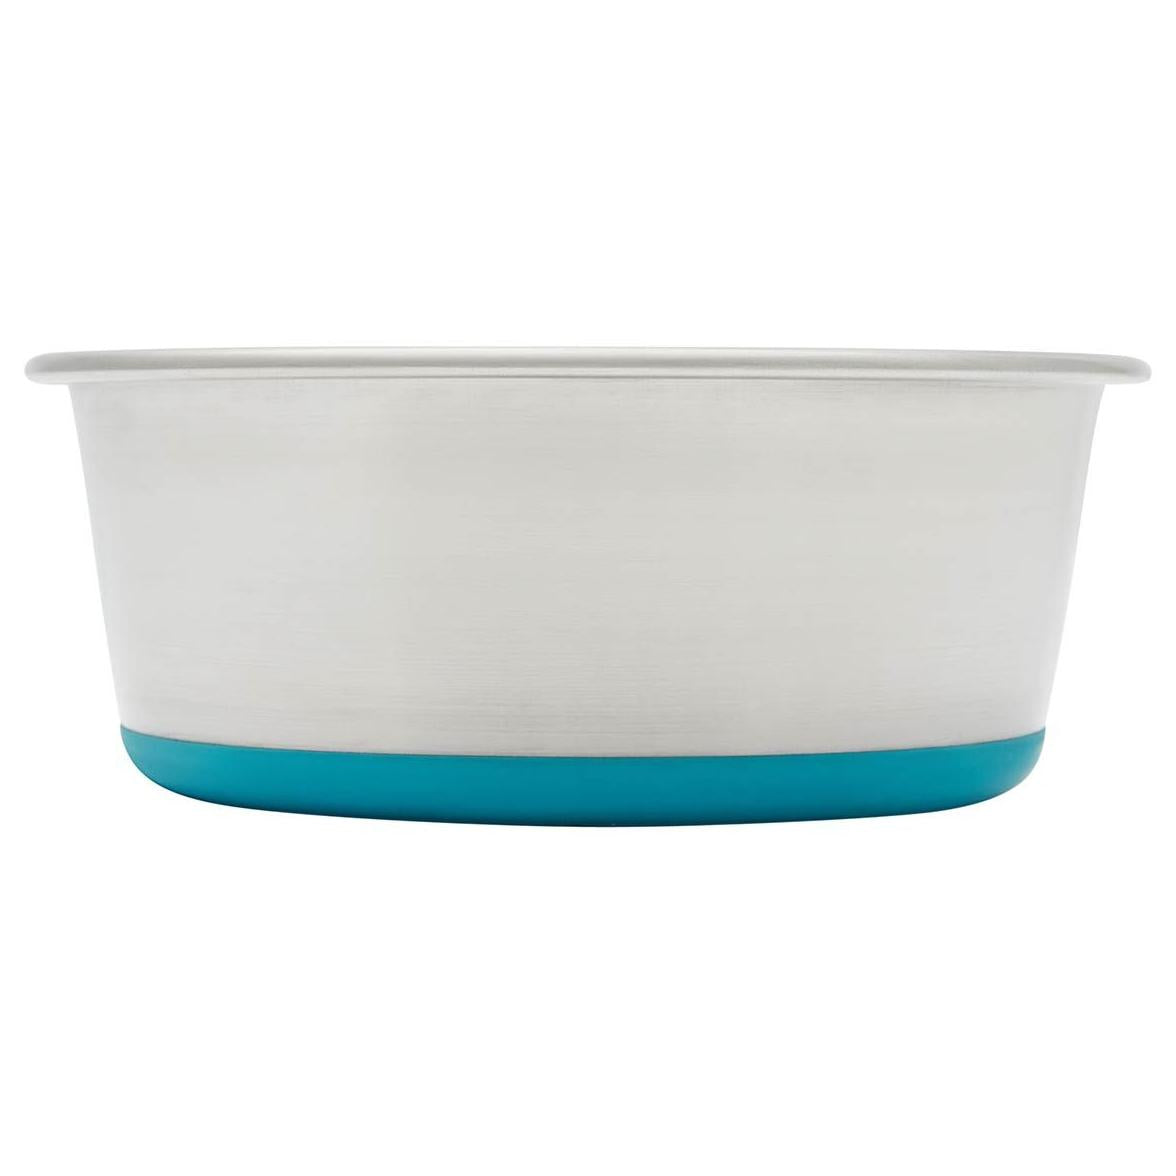 Lexi & Me Stainless Steel Bowl (100000022247) [Teal]